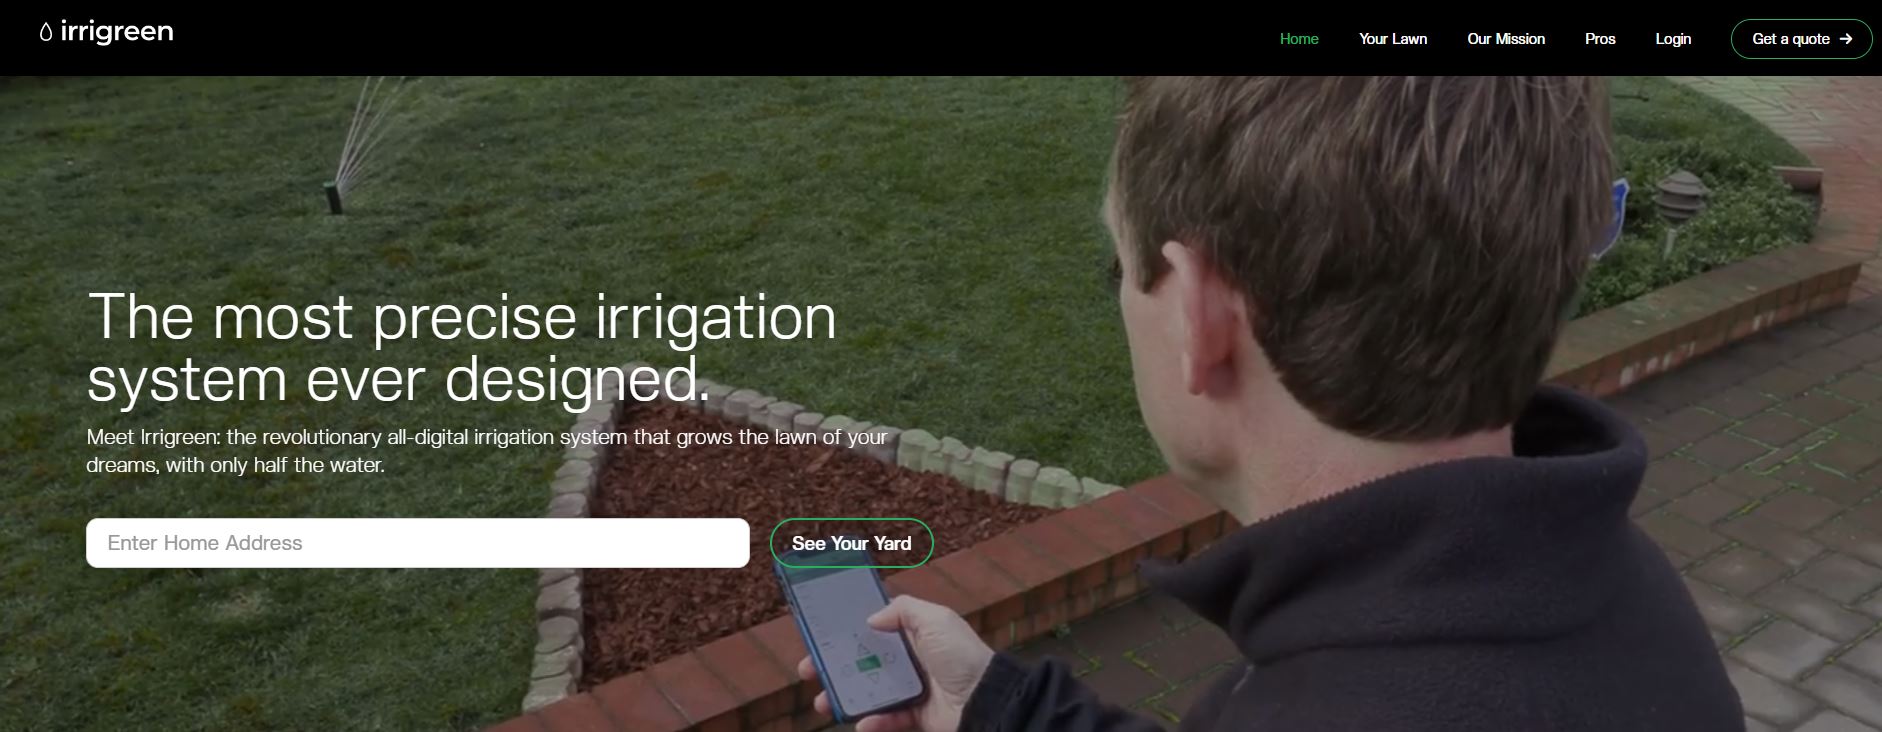 Meet Irrigreen, the innovative startup that is revolutionizing the world of lawn care with $15M in seed funding from top investors